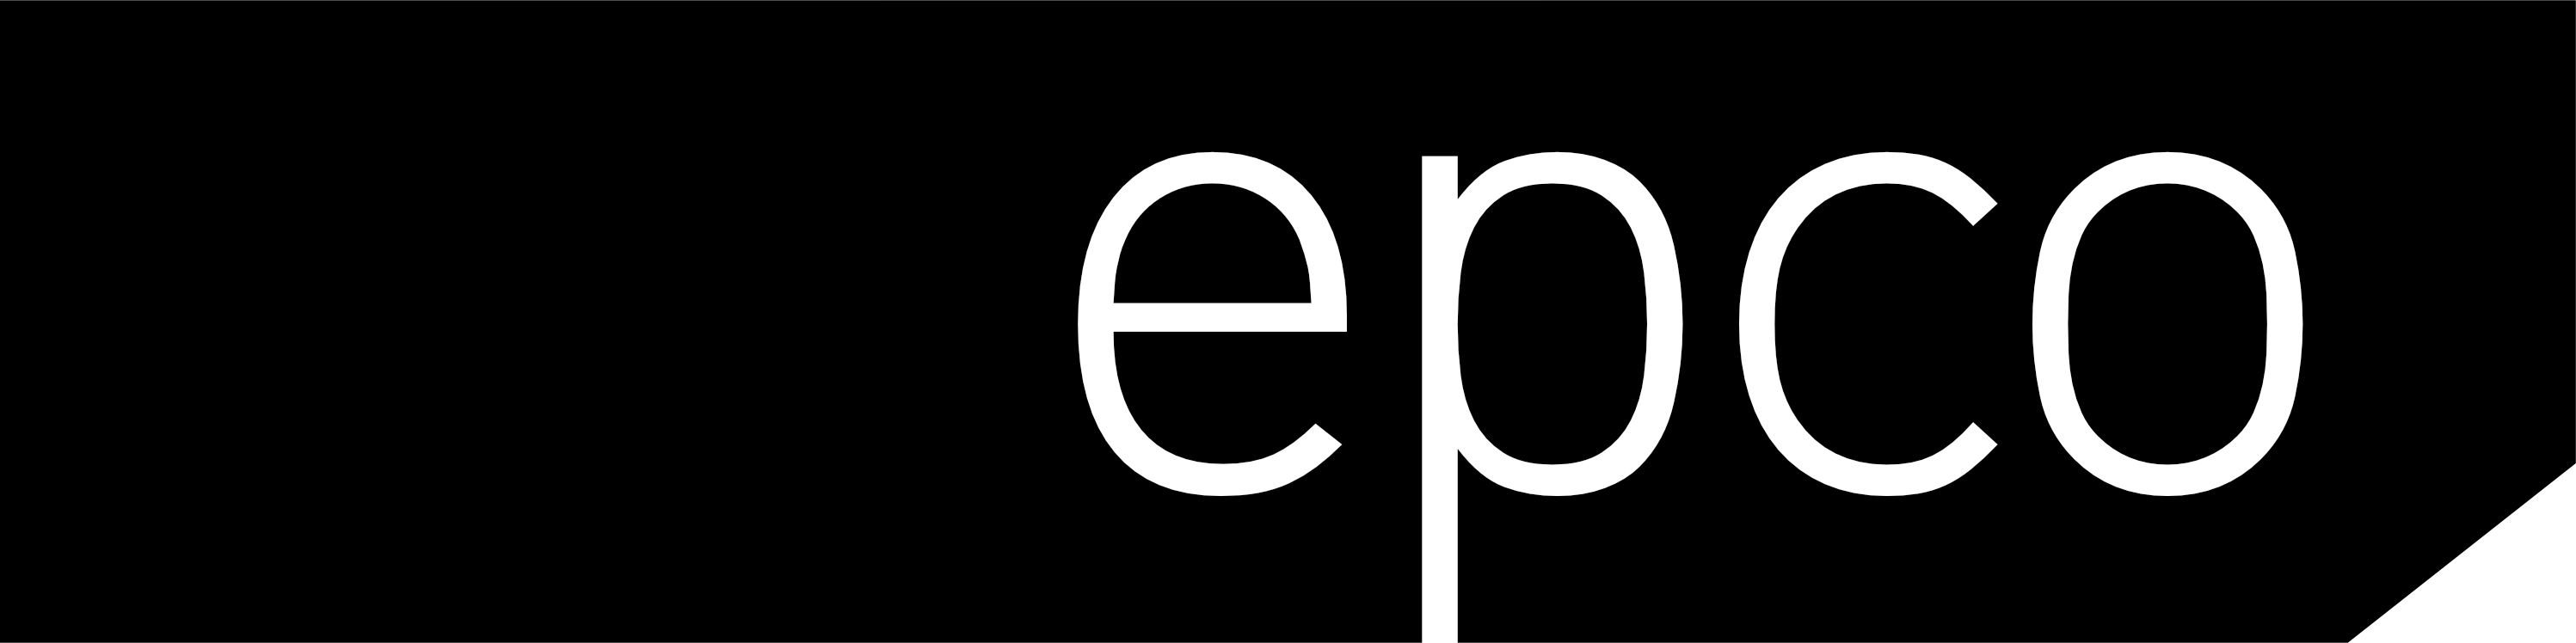 epco Logo.png